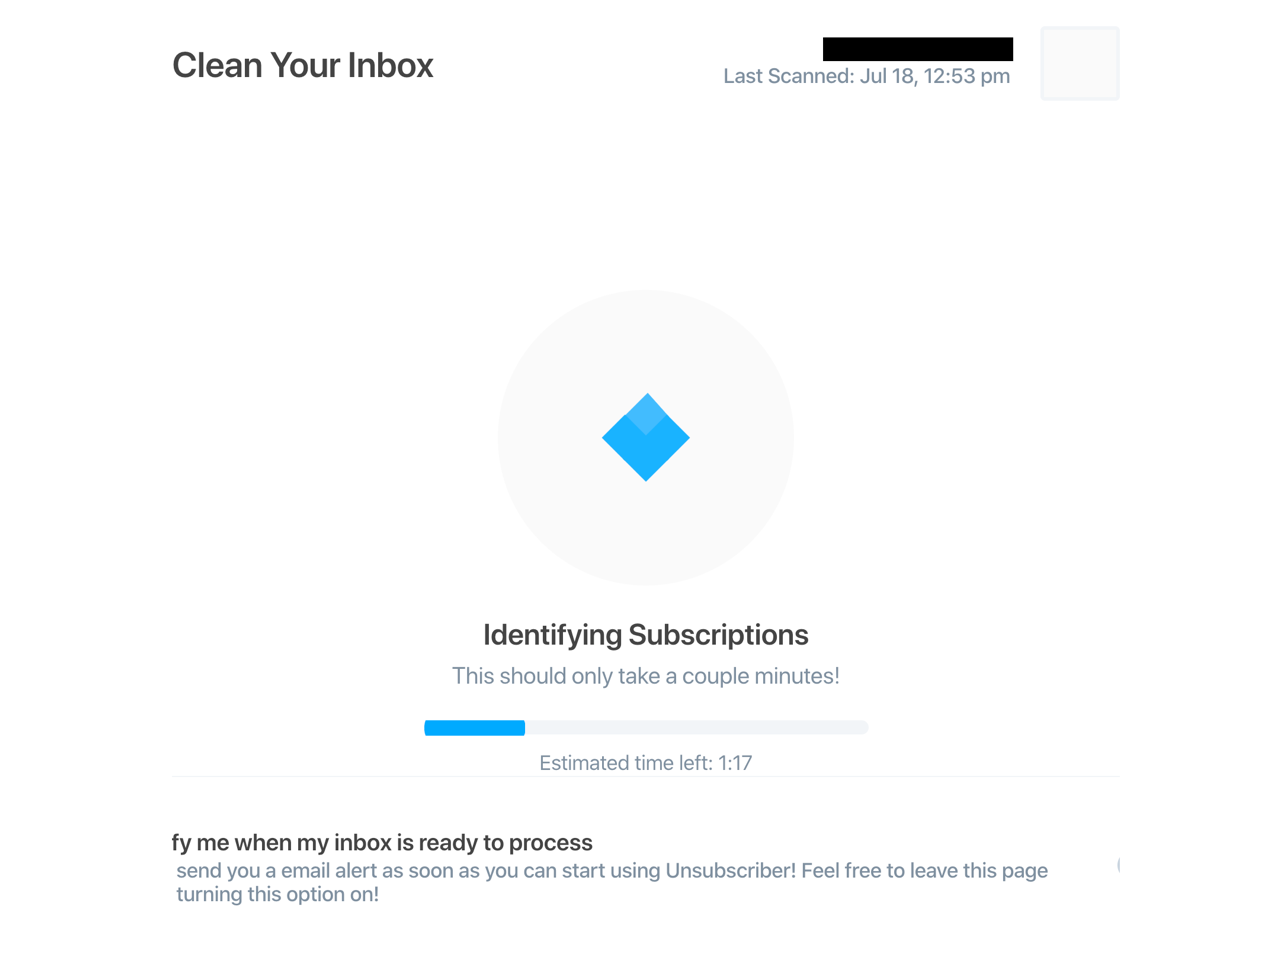 Unsubscriber by Polymail